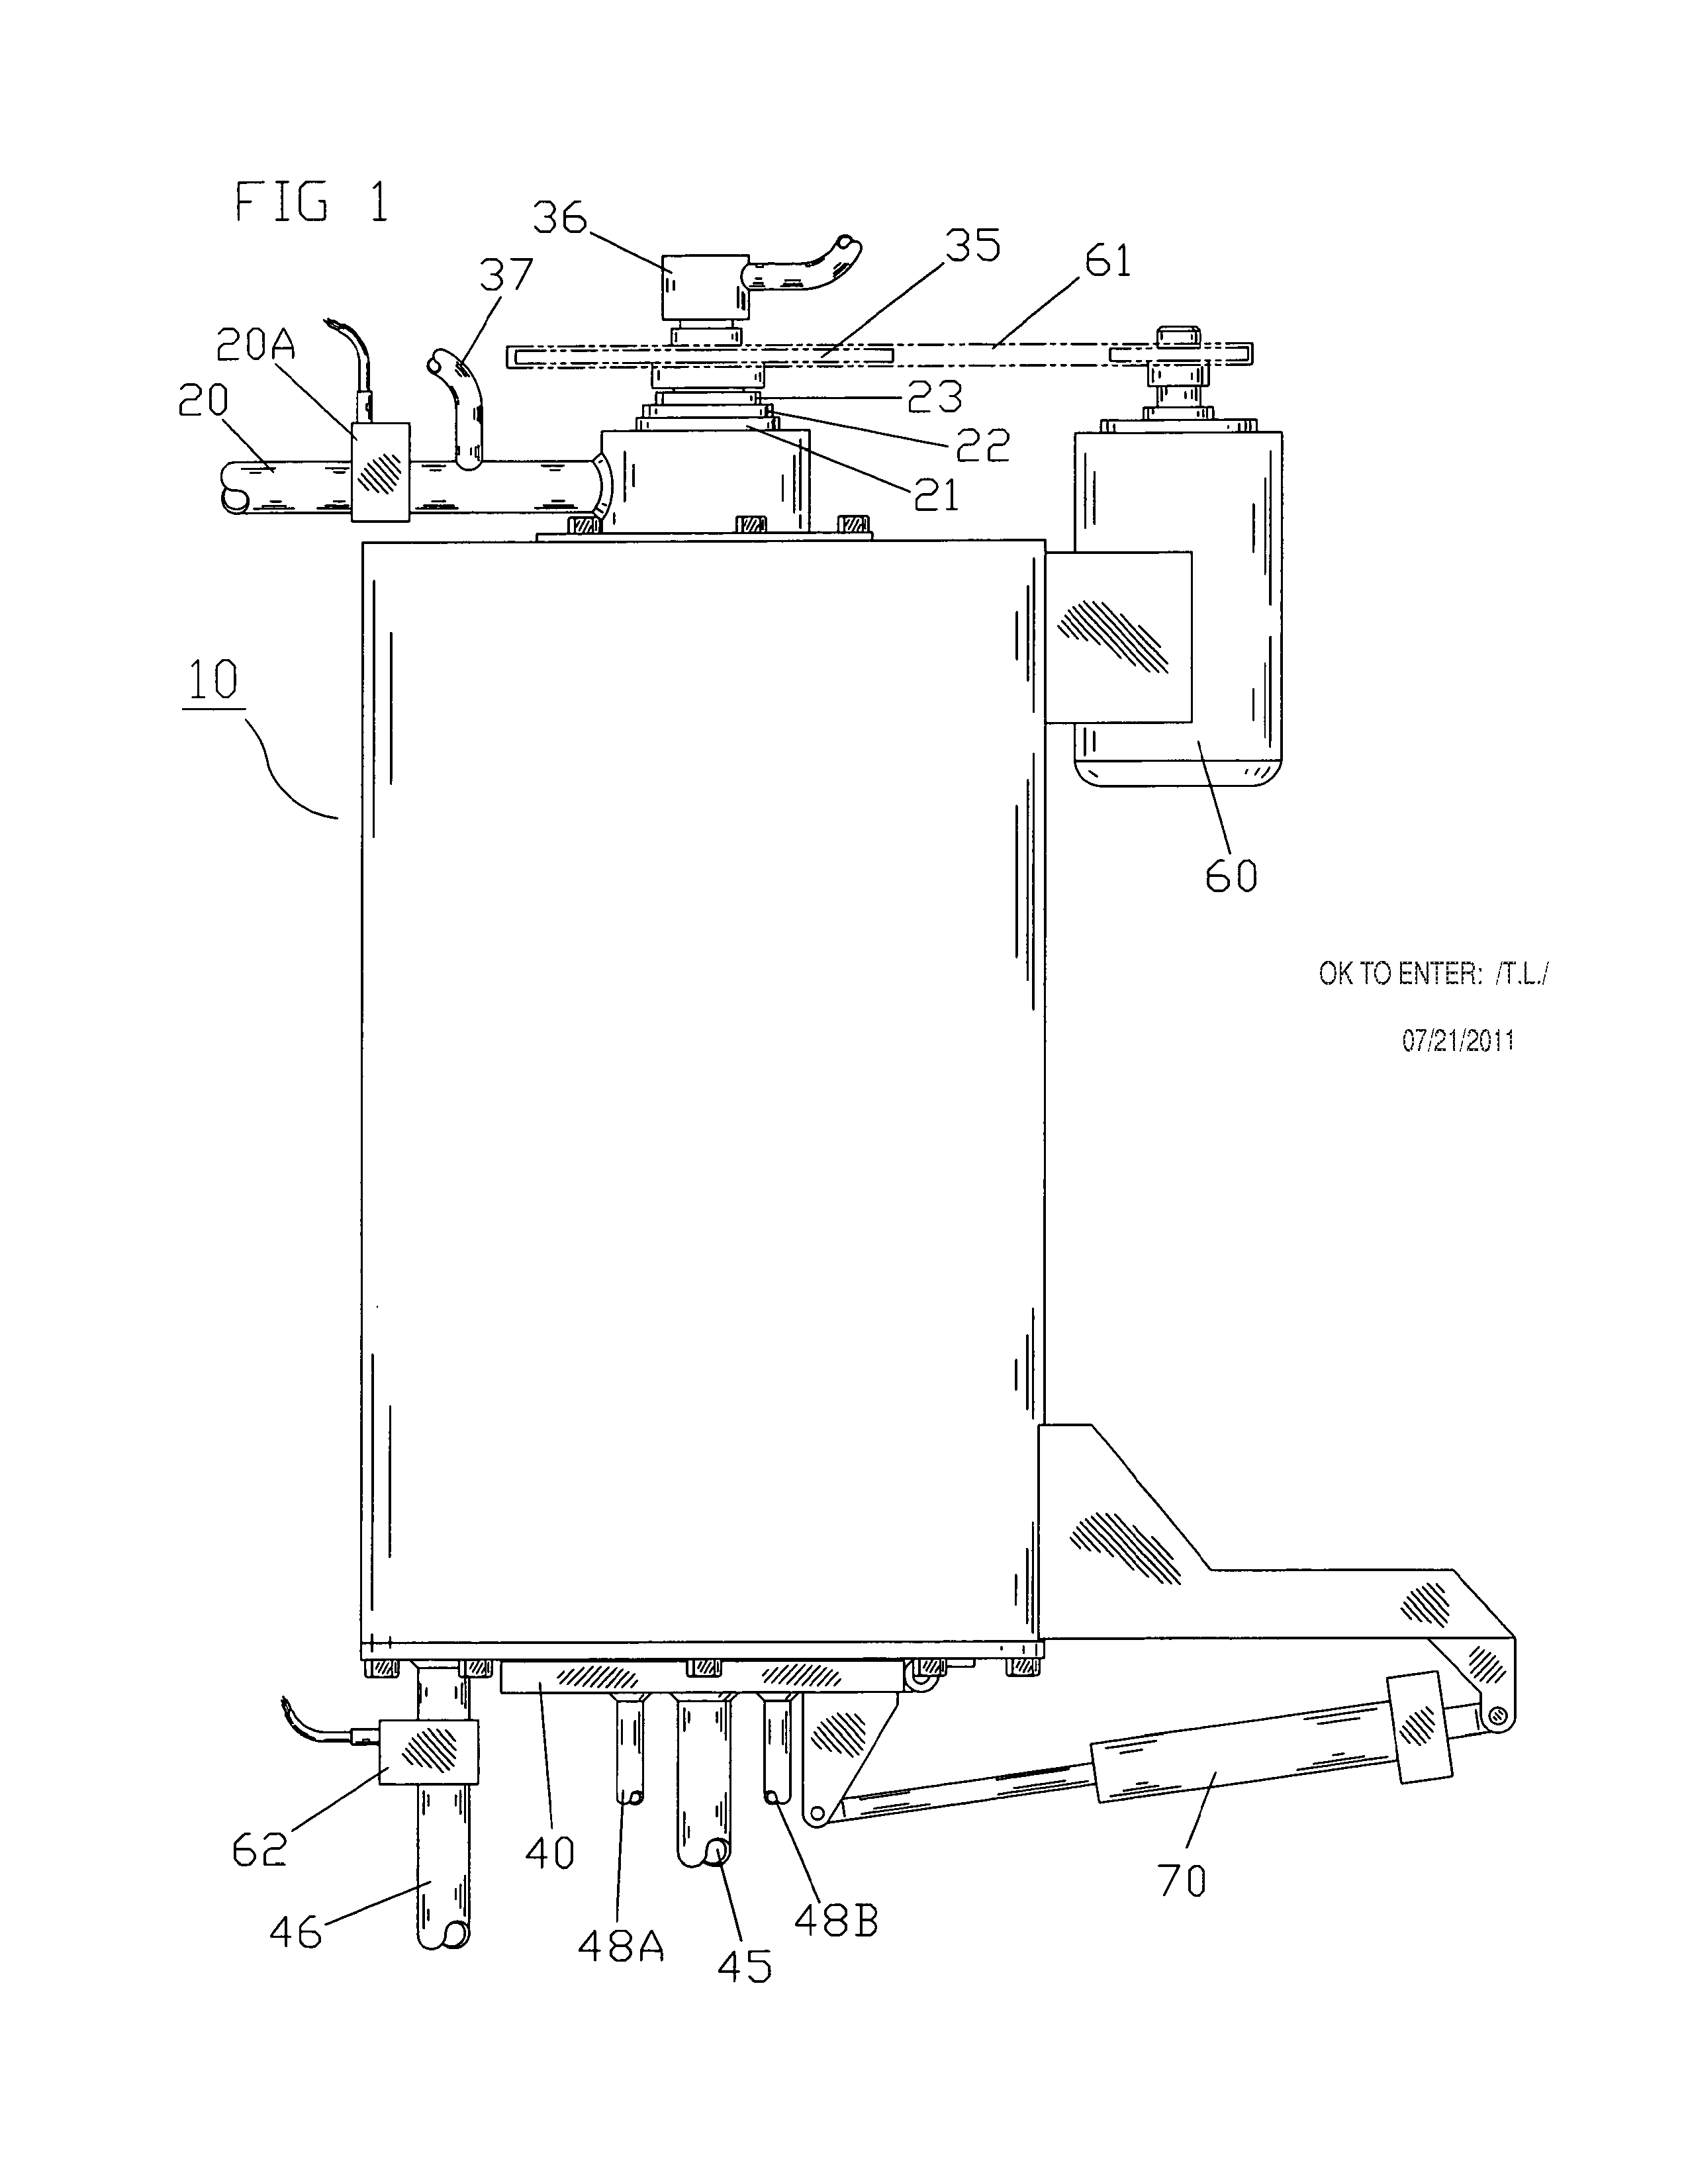 Method and apparatus for separating and dewatering slurries